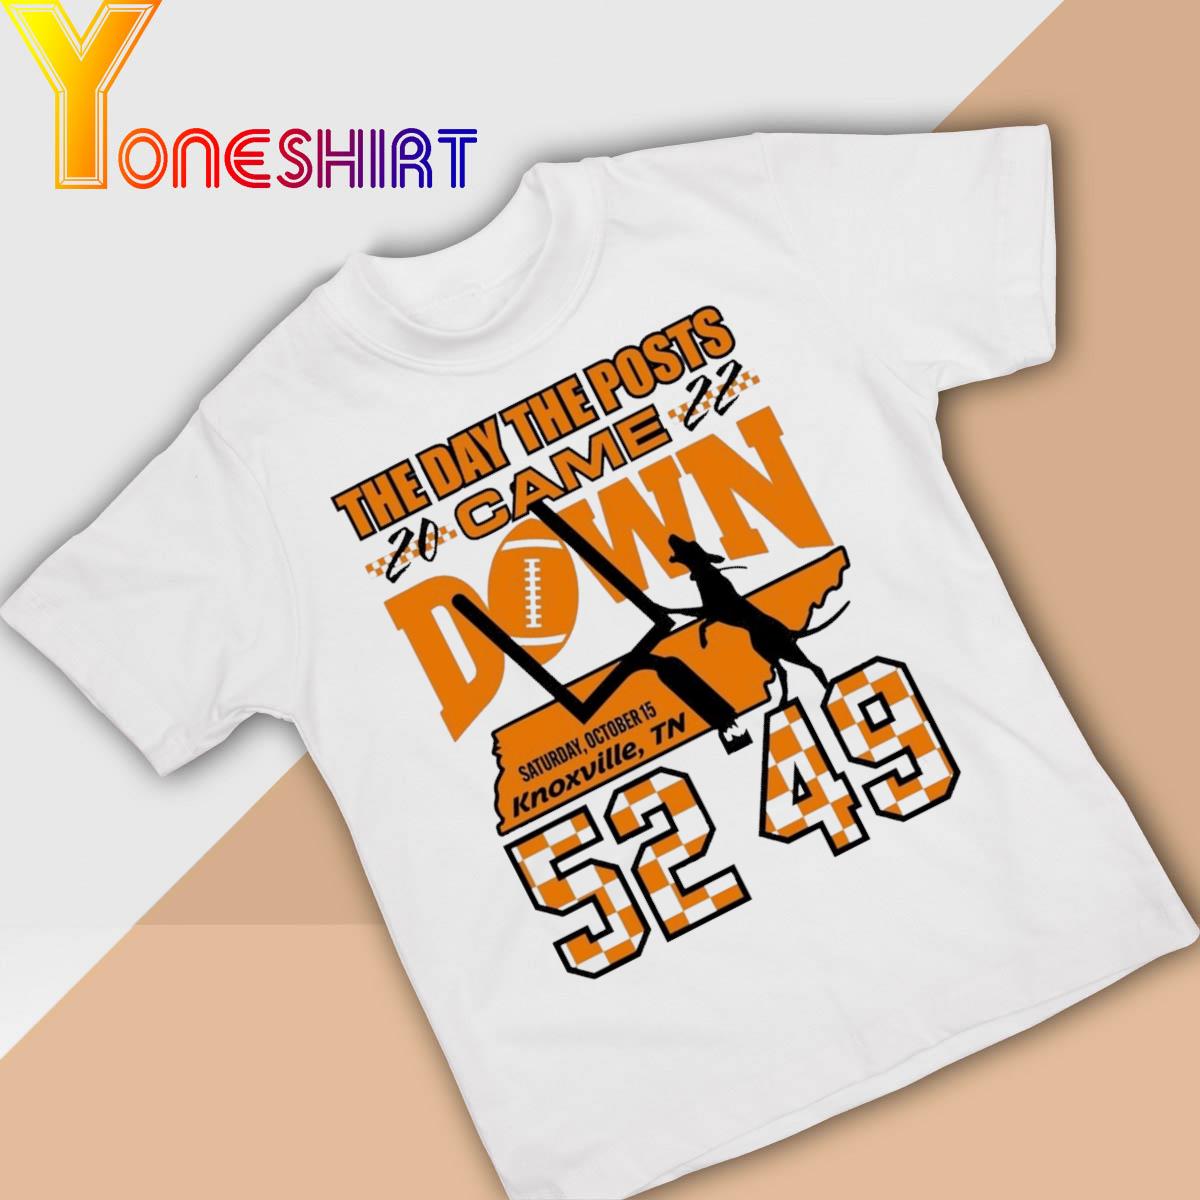 The Day the Posts Came Down Tennessee Vols 52 49 shirt